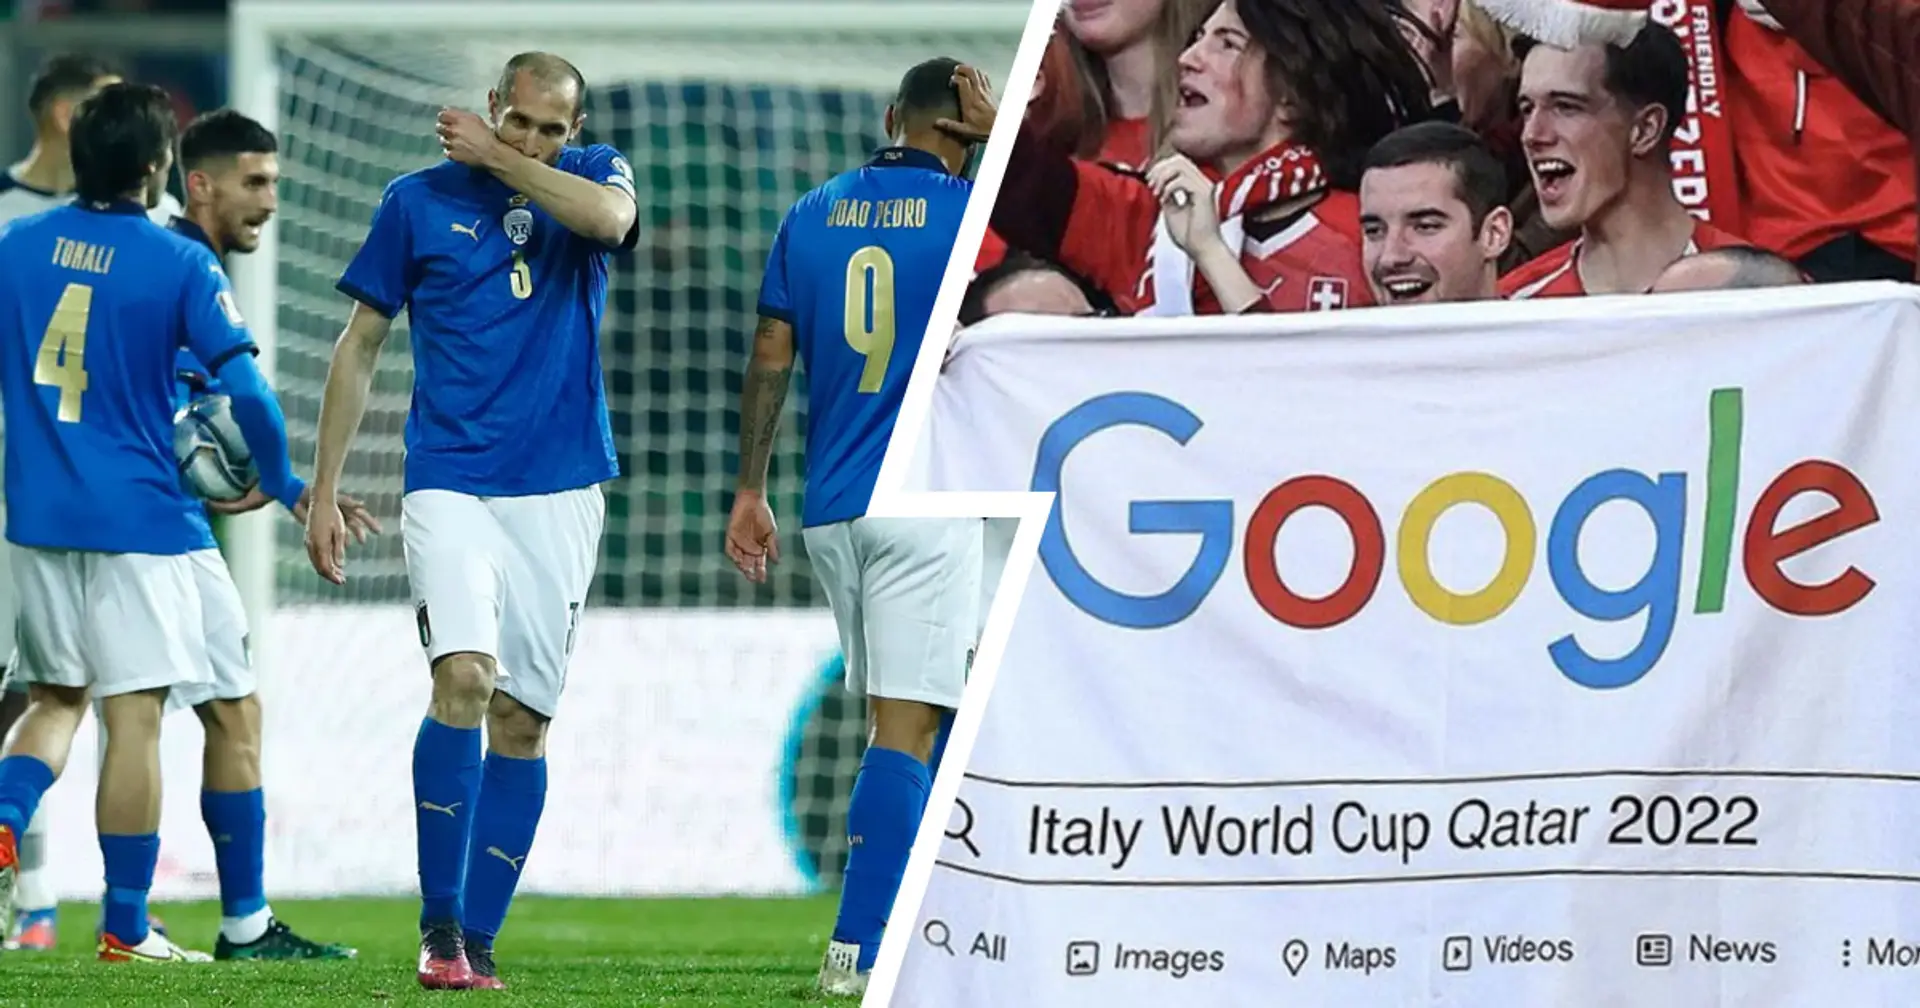 'Did you mean Switzerland?': Italy brutally trolled by Swiss fans after World Cup qualification failure